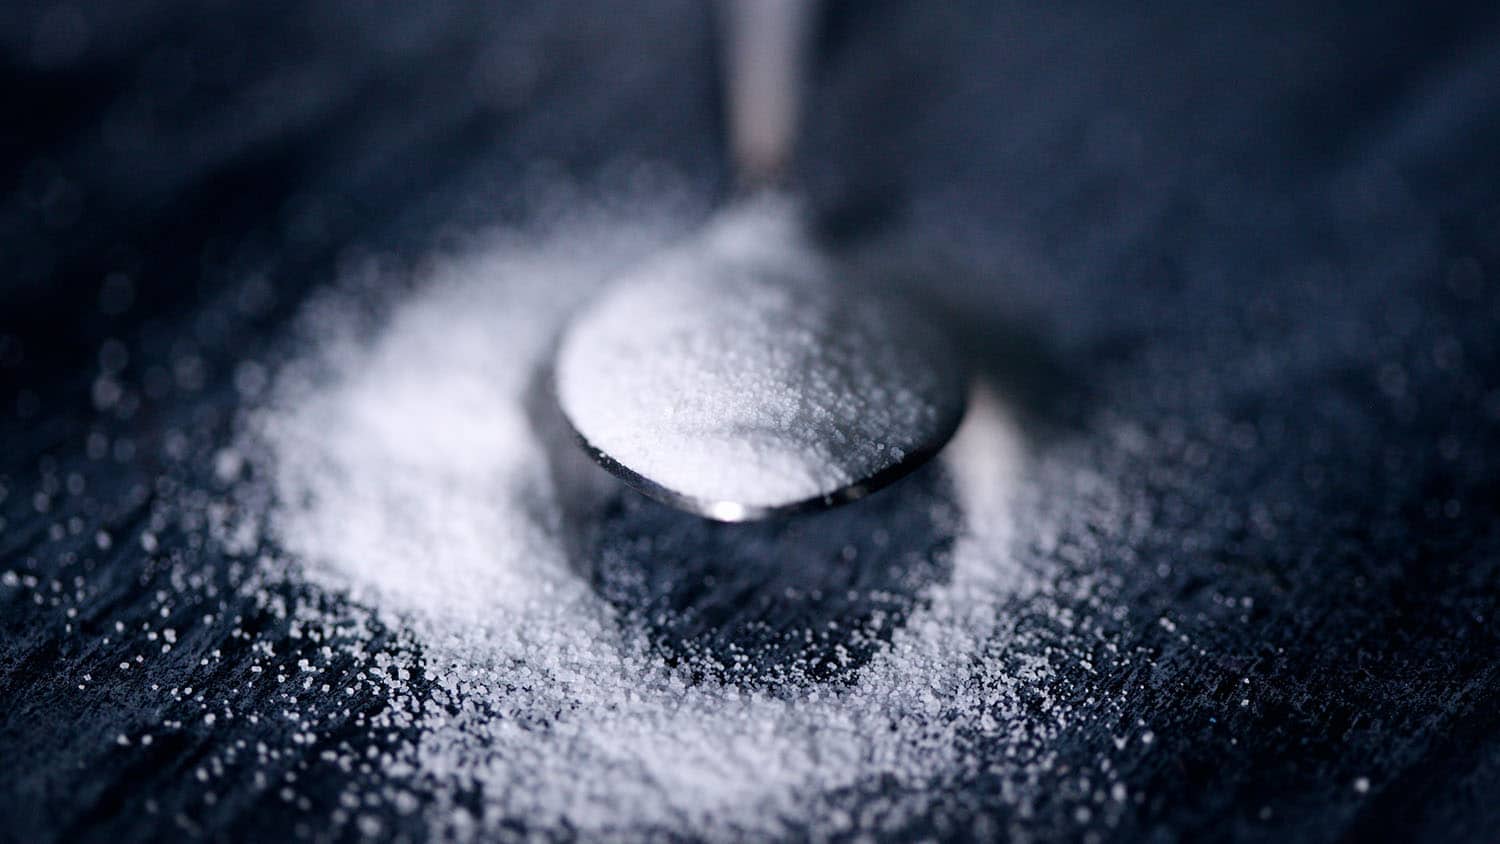 A spoon holds a scoop of white powder over a grey table.